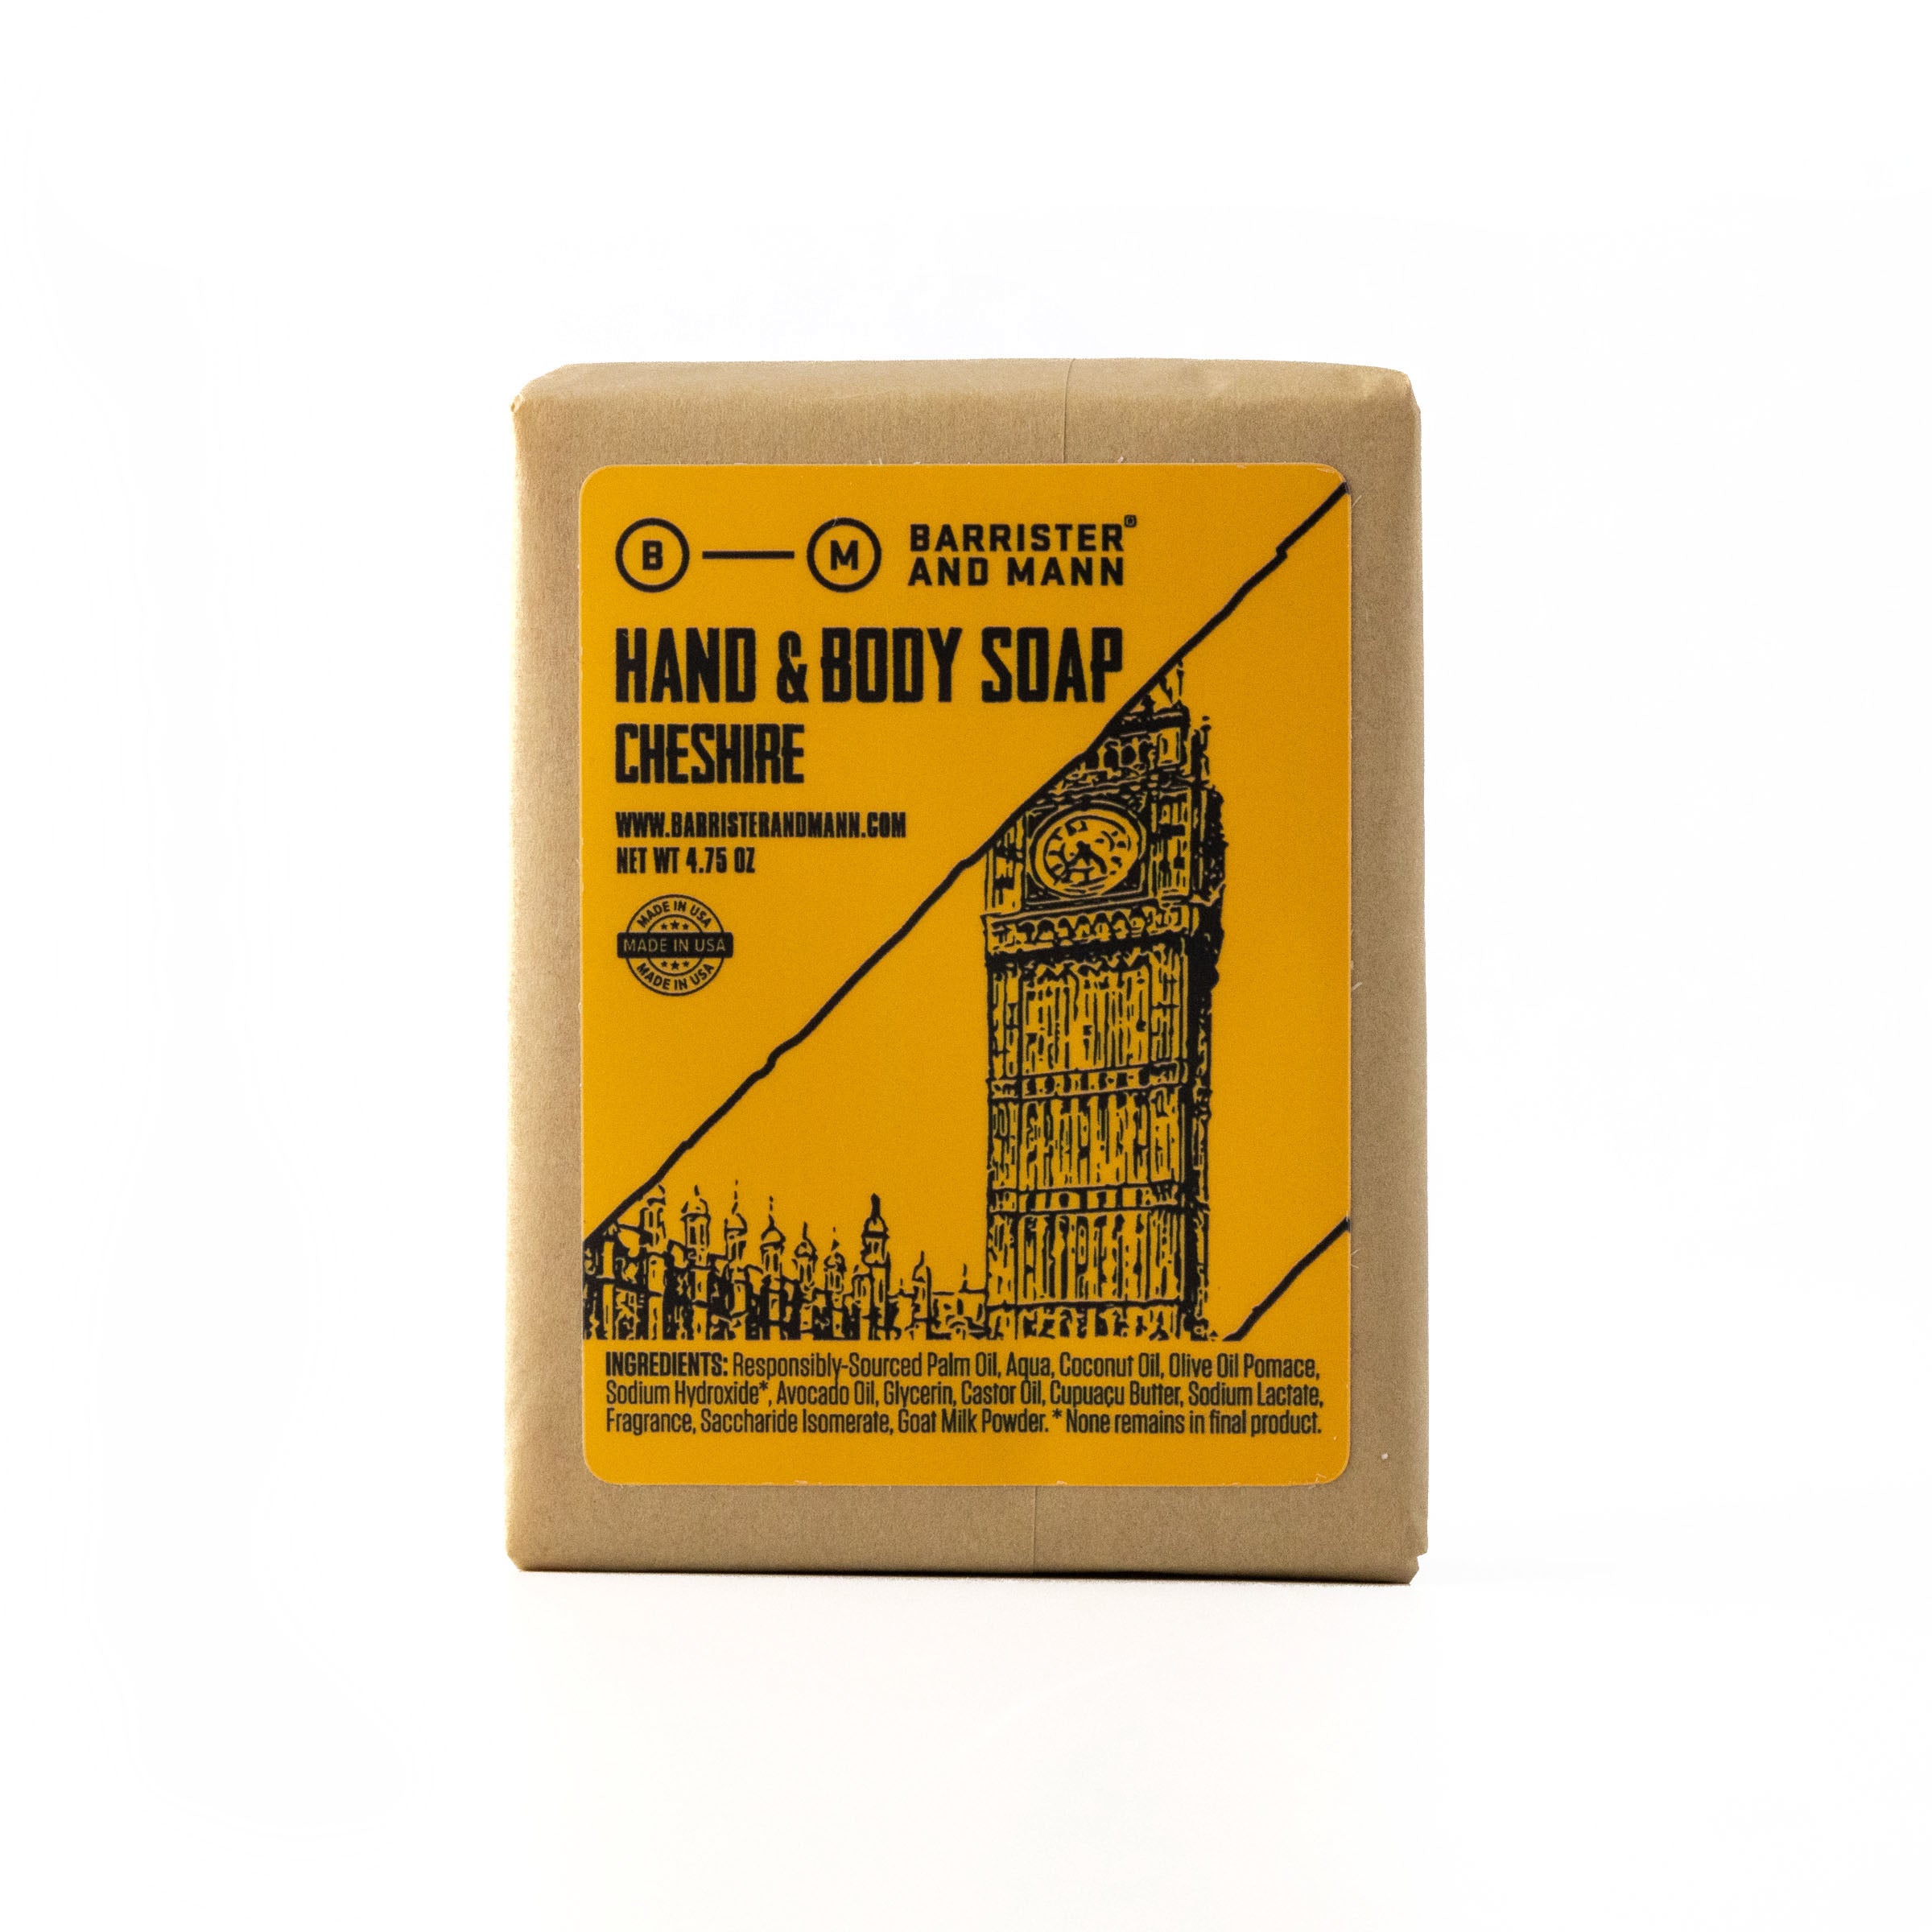 Hand & Body Soap: Cheshire - Barrister and Mann LLC